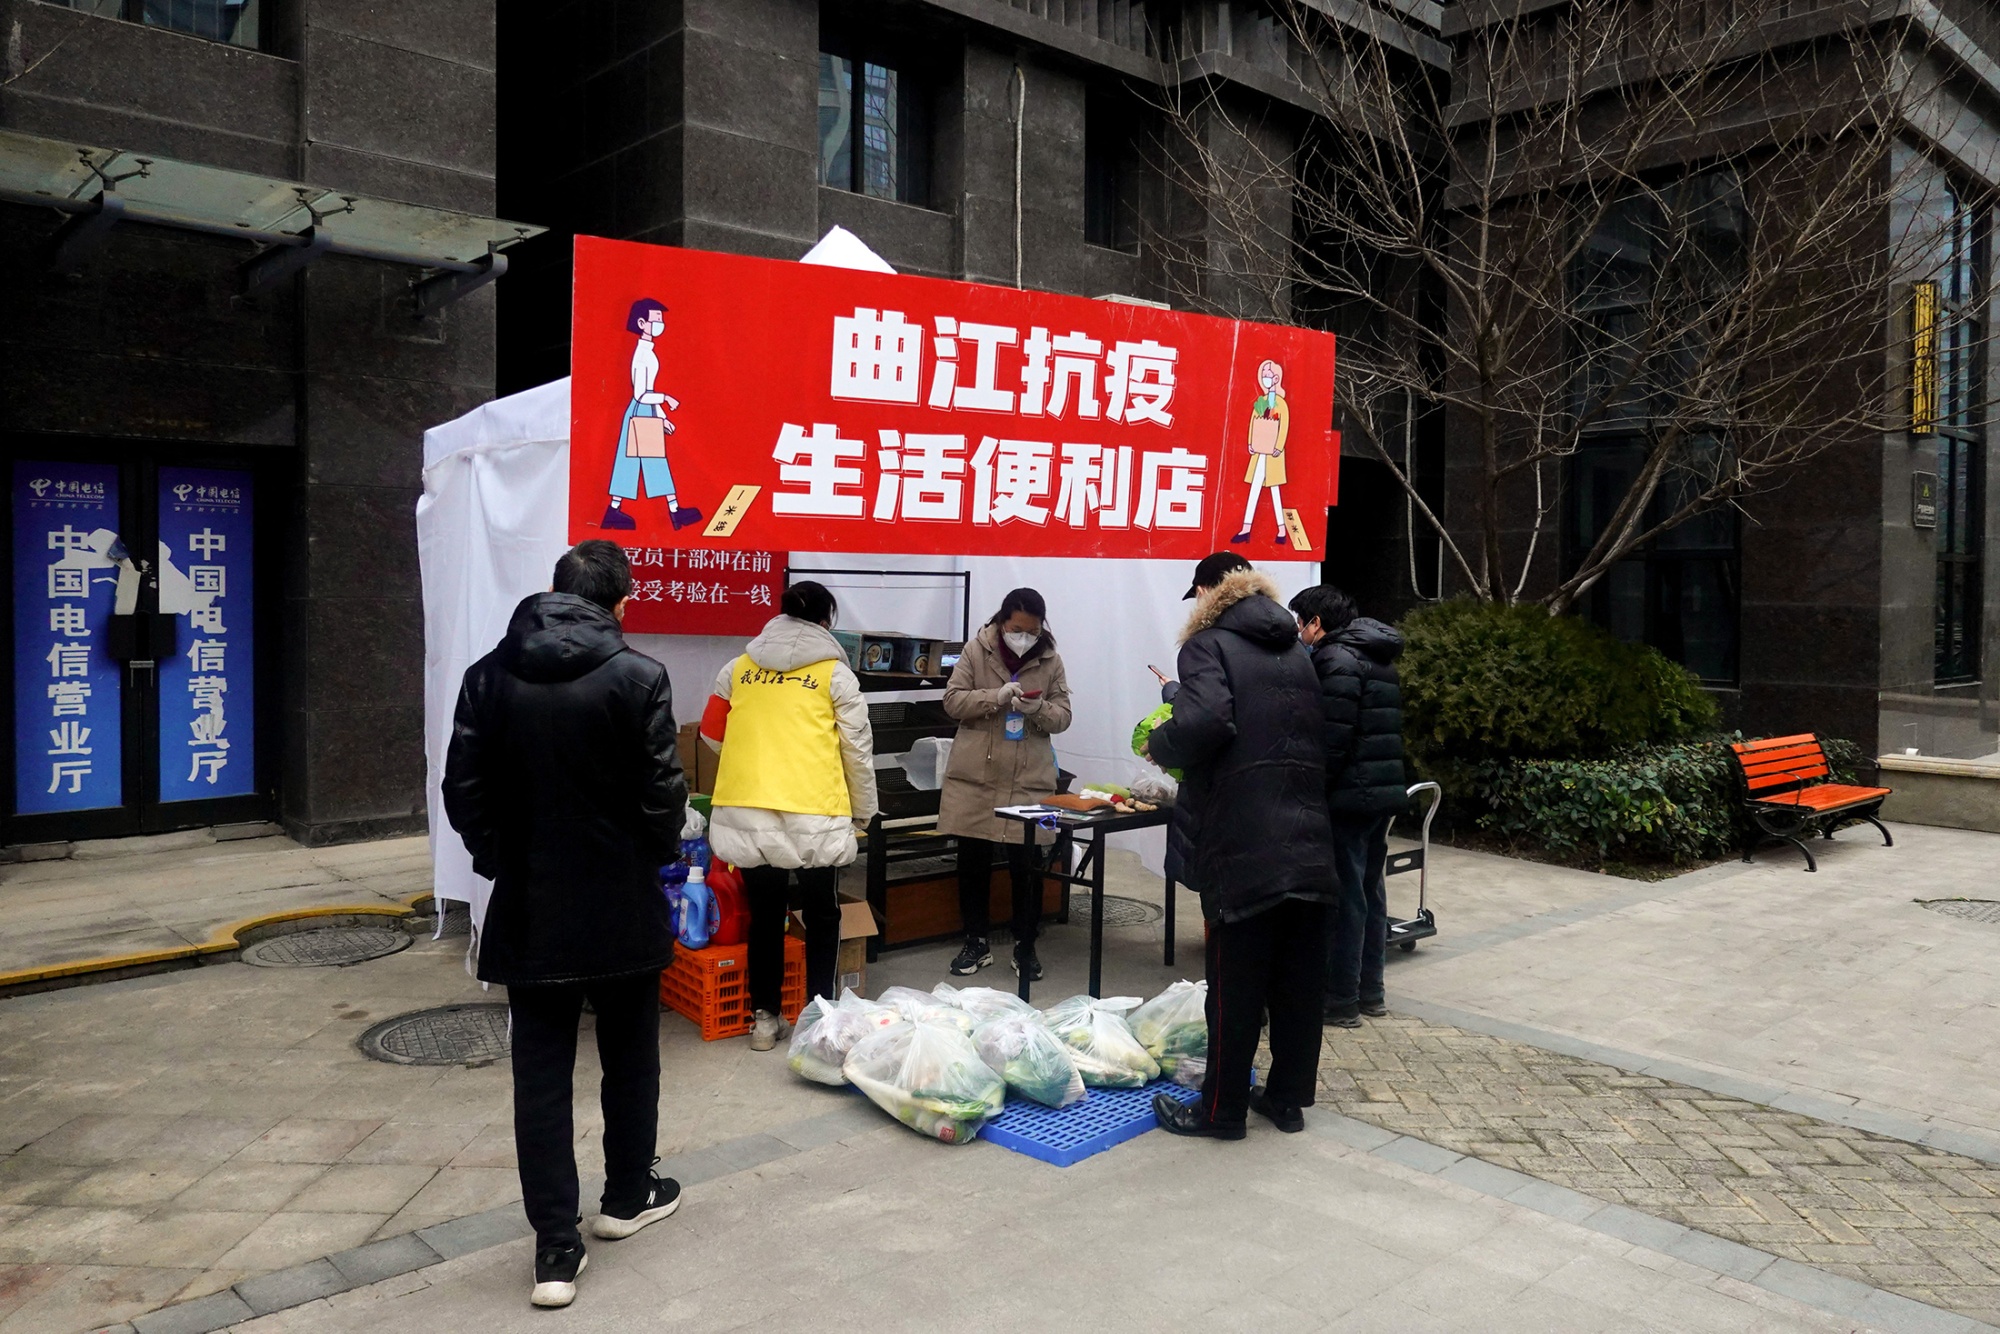 Residents buy food and daily necessities at a temporary stall set up in a residential compound in Xi’an on Jan. 6.